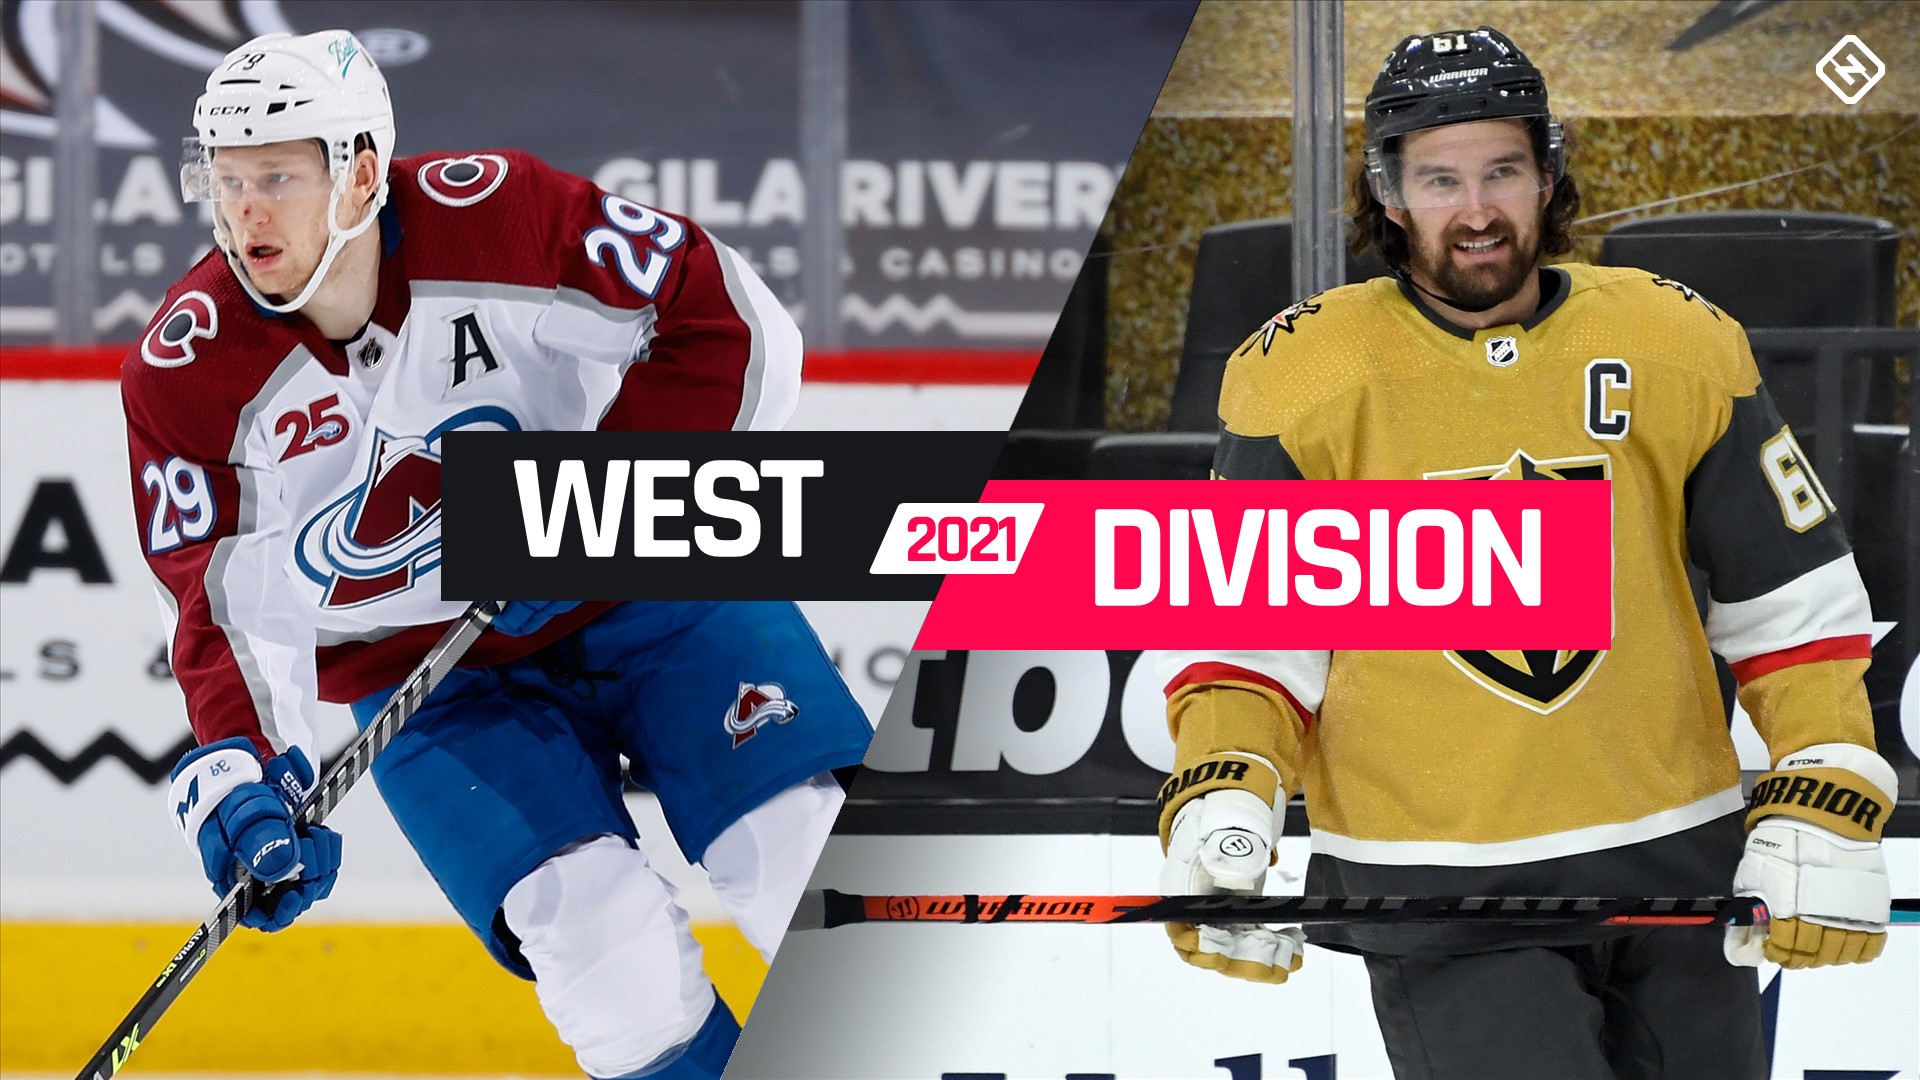 Nhl Playoffs Bracket 21 West Division Series Predictions Odds Breakdowns Stanley Cup Predictions Sporting News